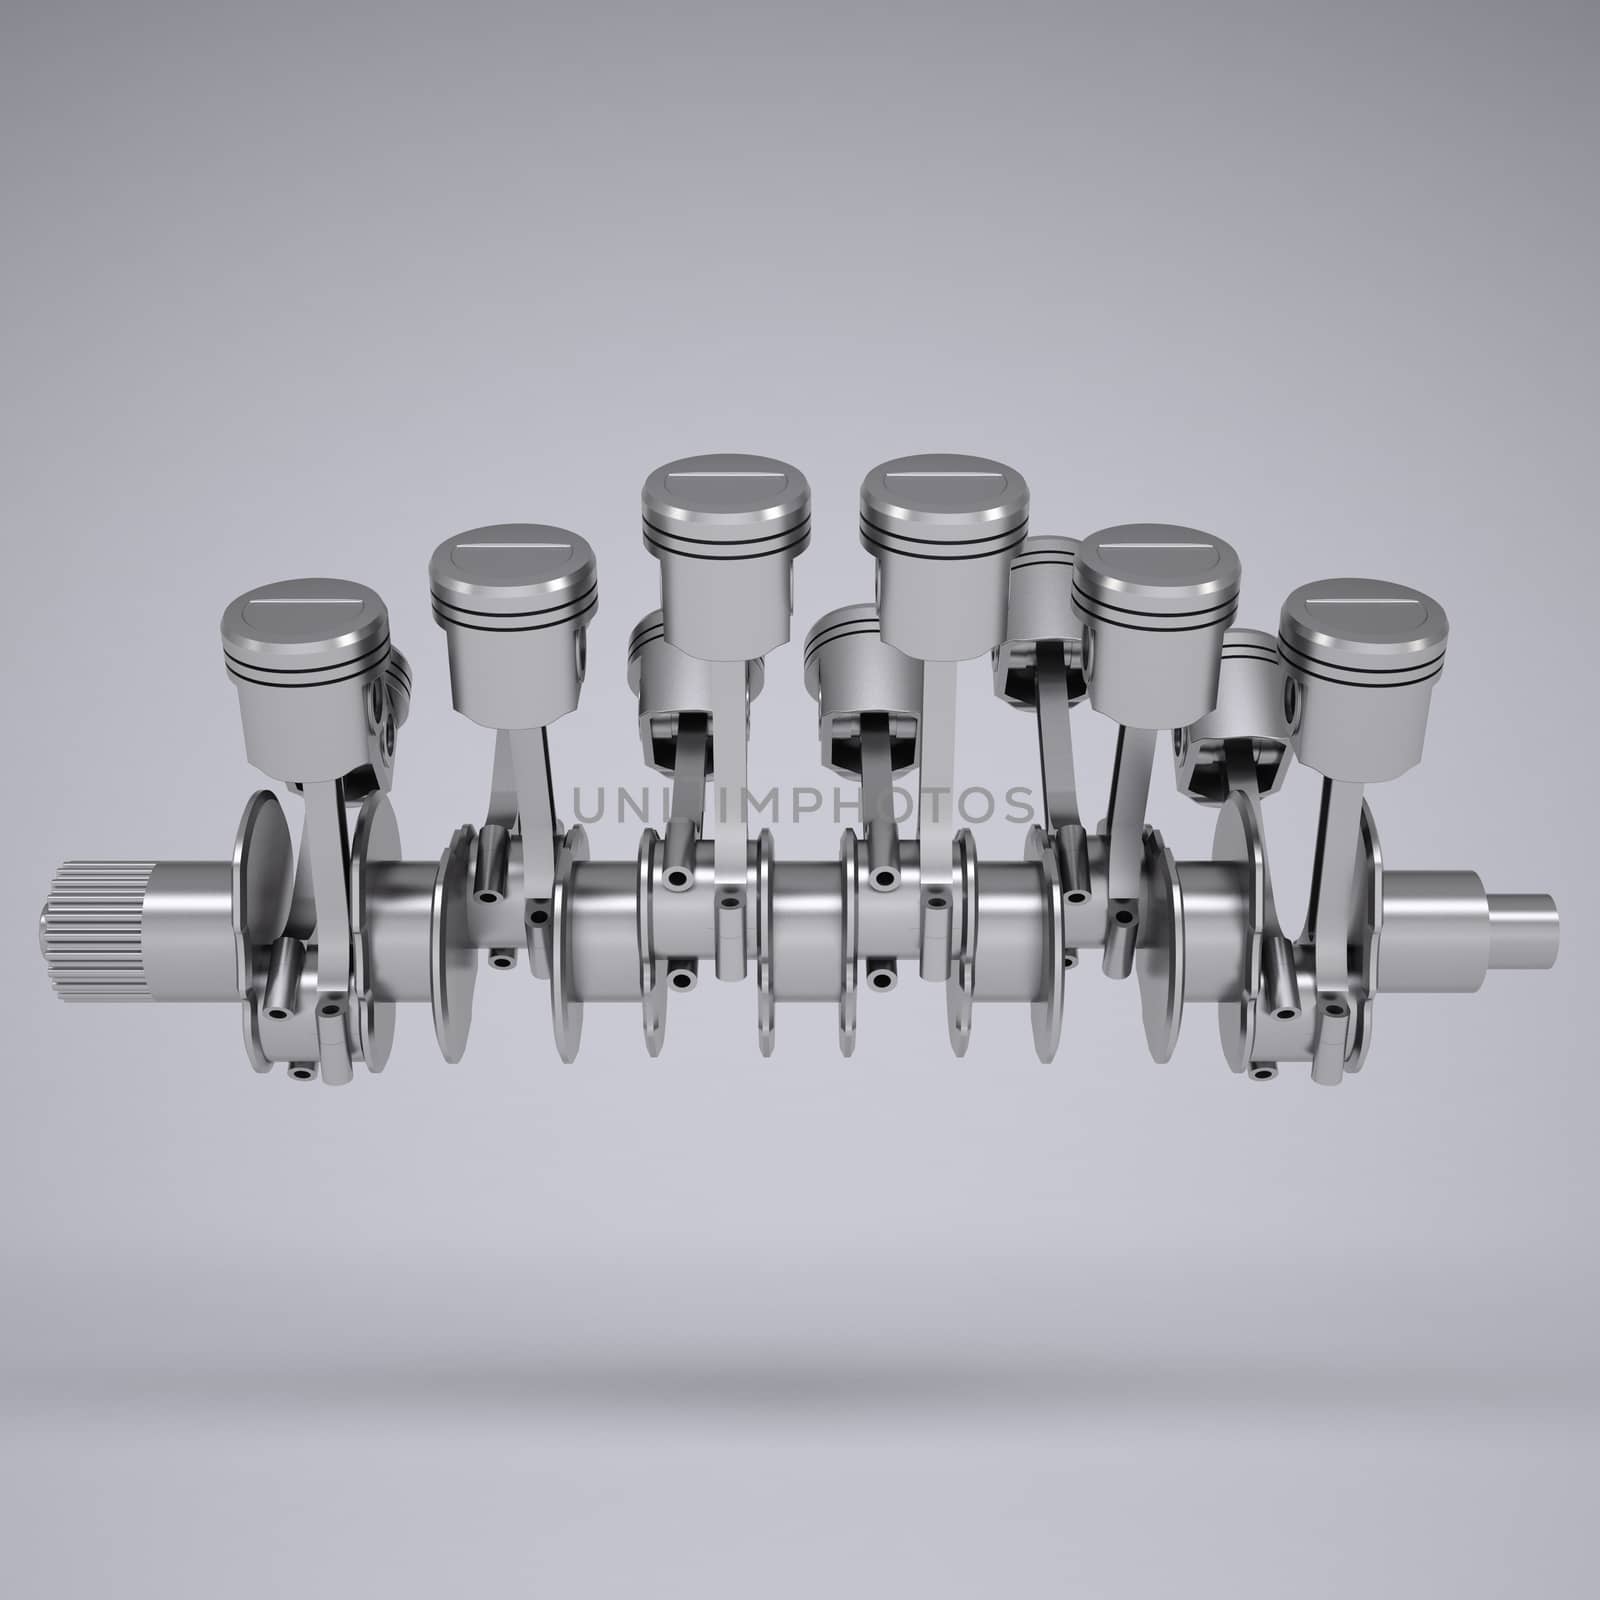 Crankshaft and pistons. Render on a gray background